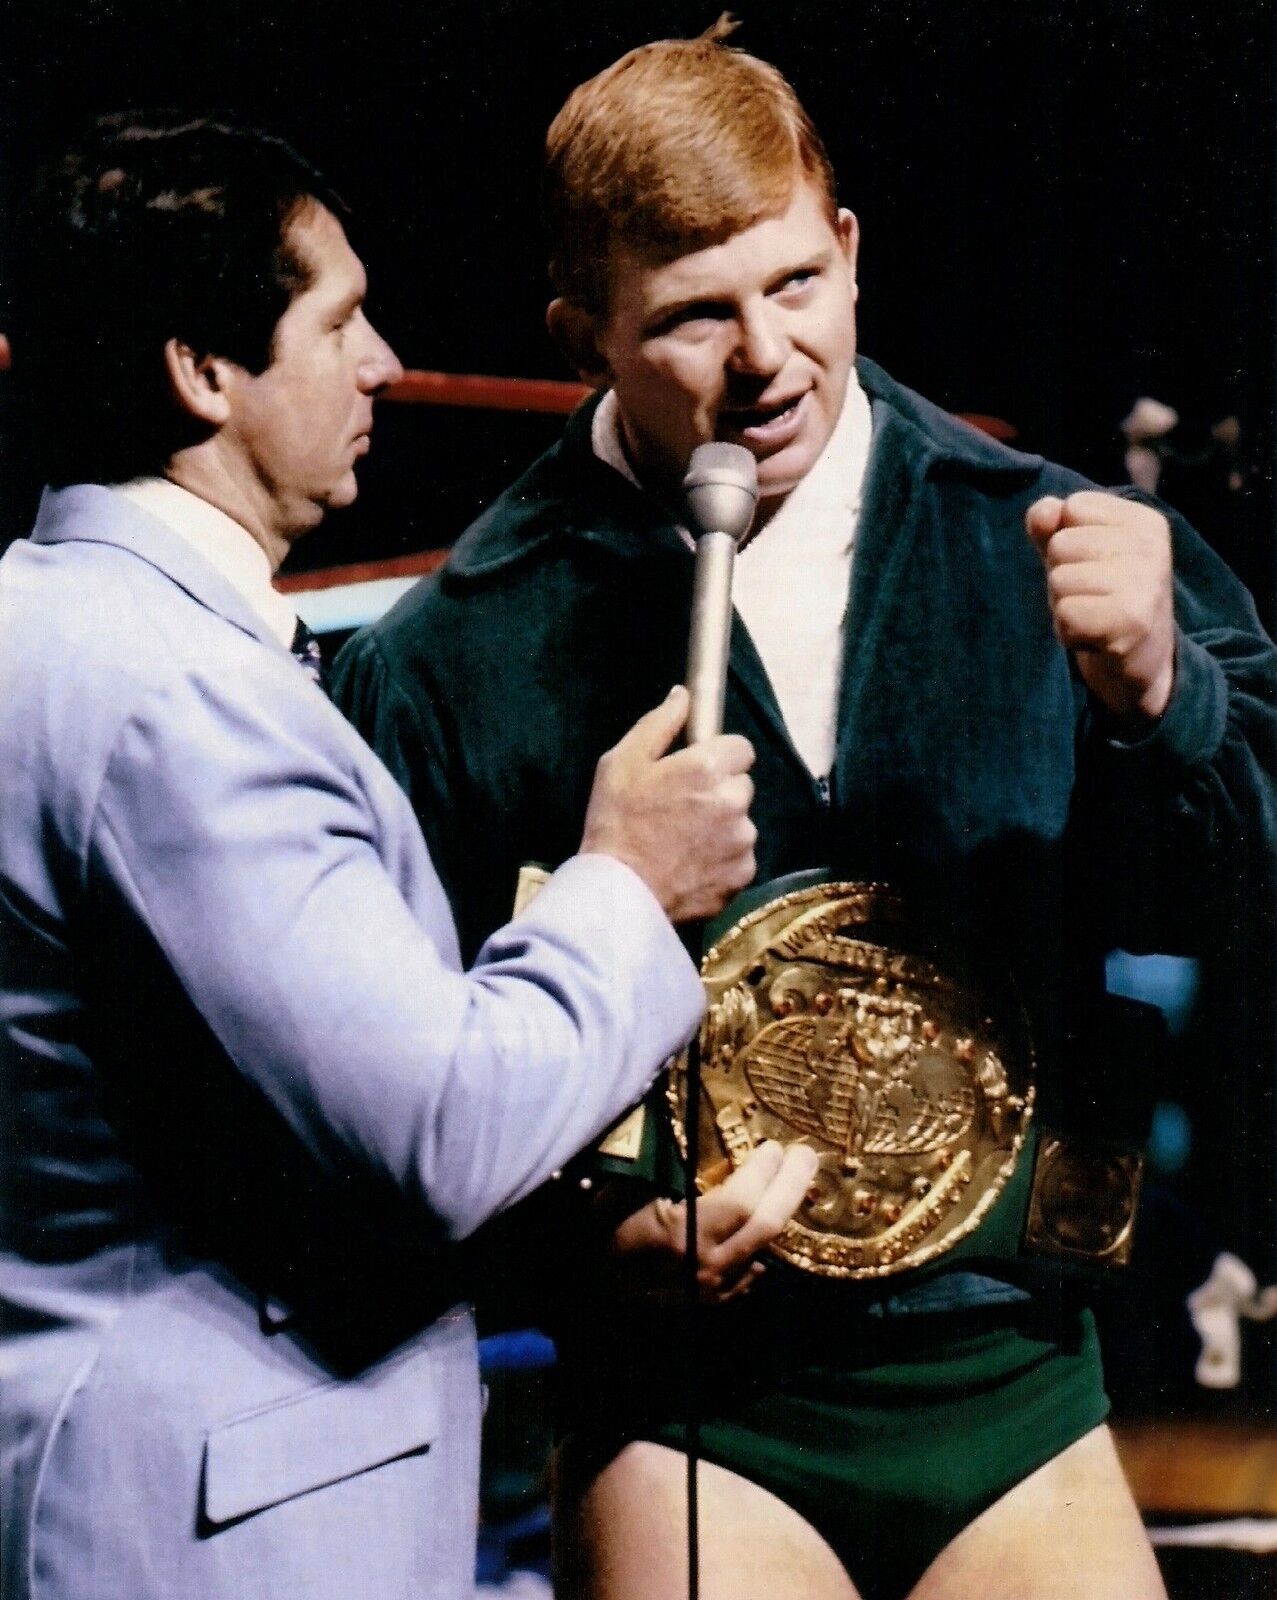 Bob Backlund & Vince McMahon 8x10 Photo Poster painting Picture WWE w/ WWWF Championship Belt